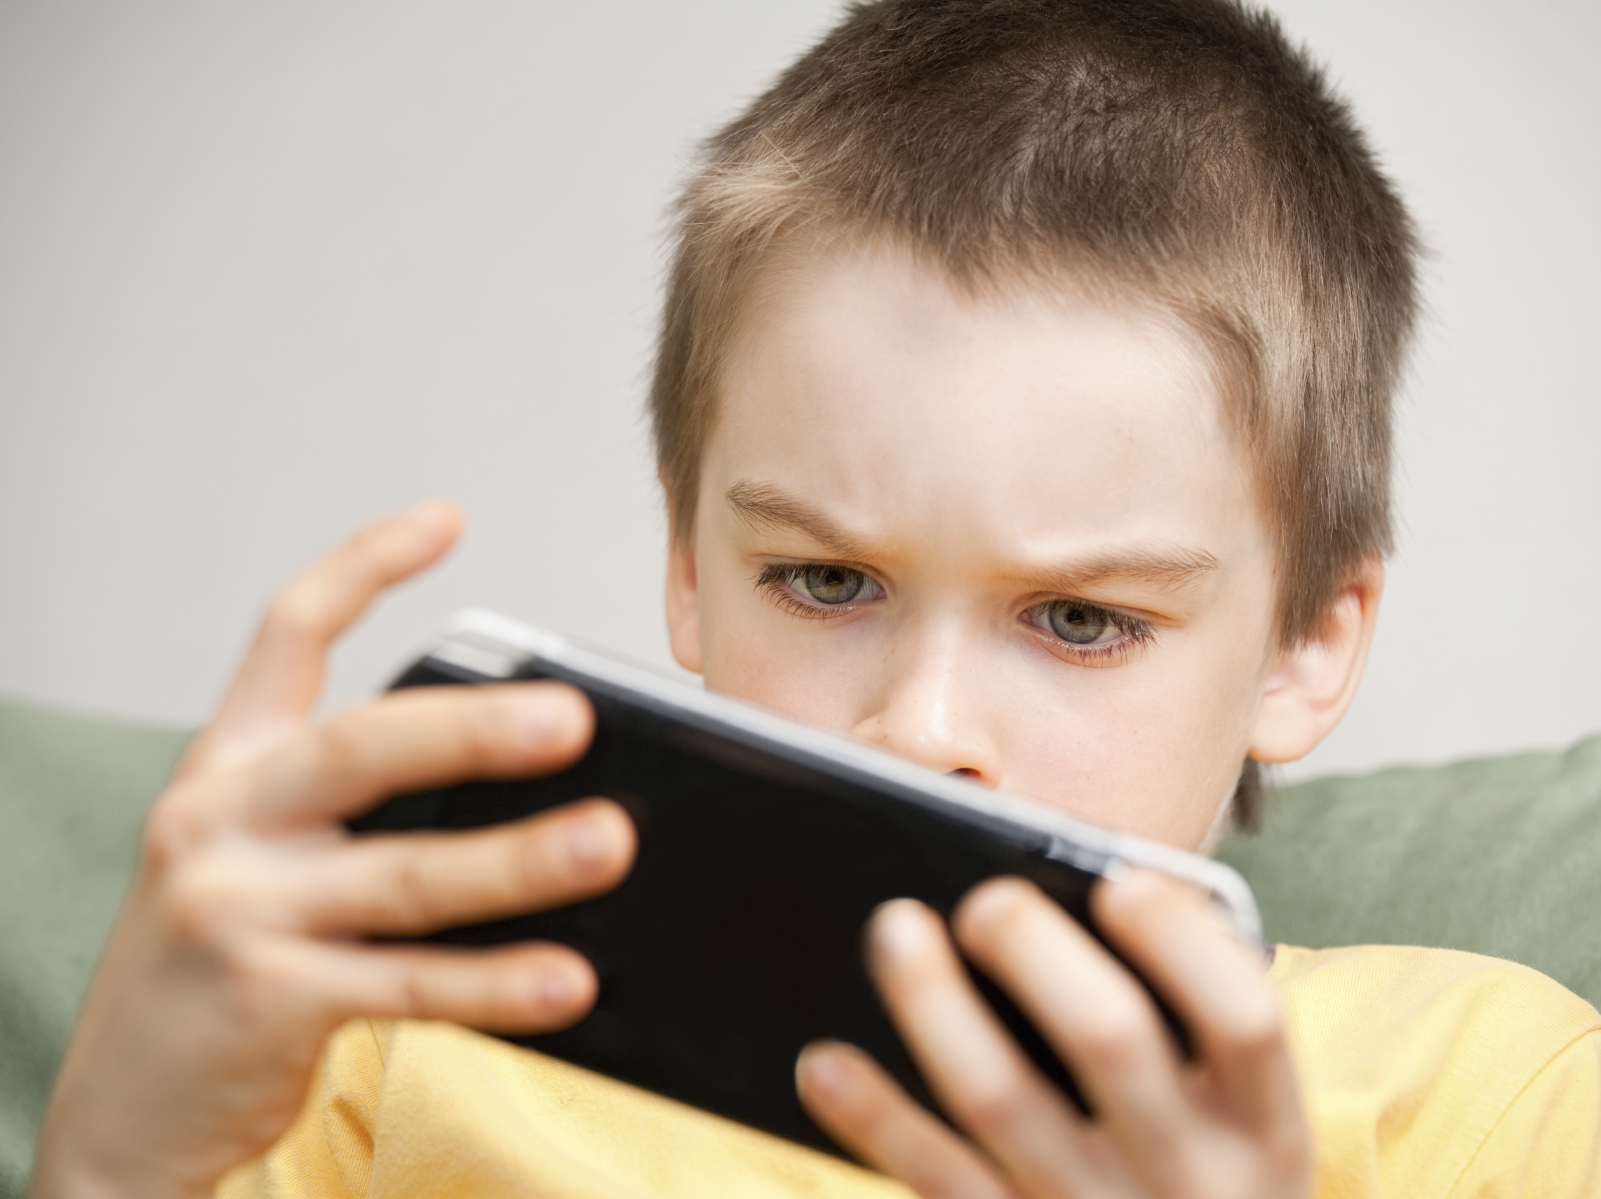 Could games be helping kids concentrate? (Getty Images)